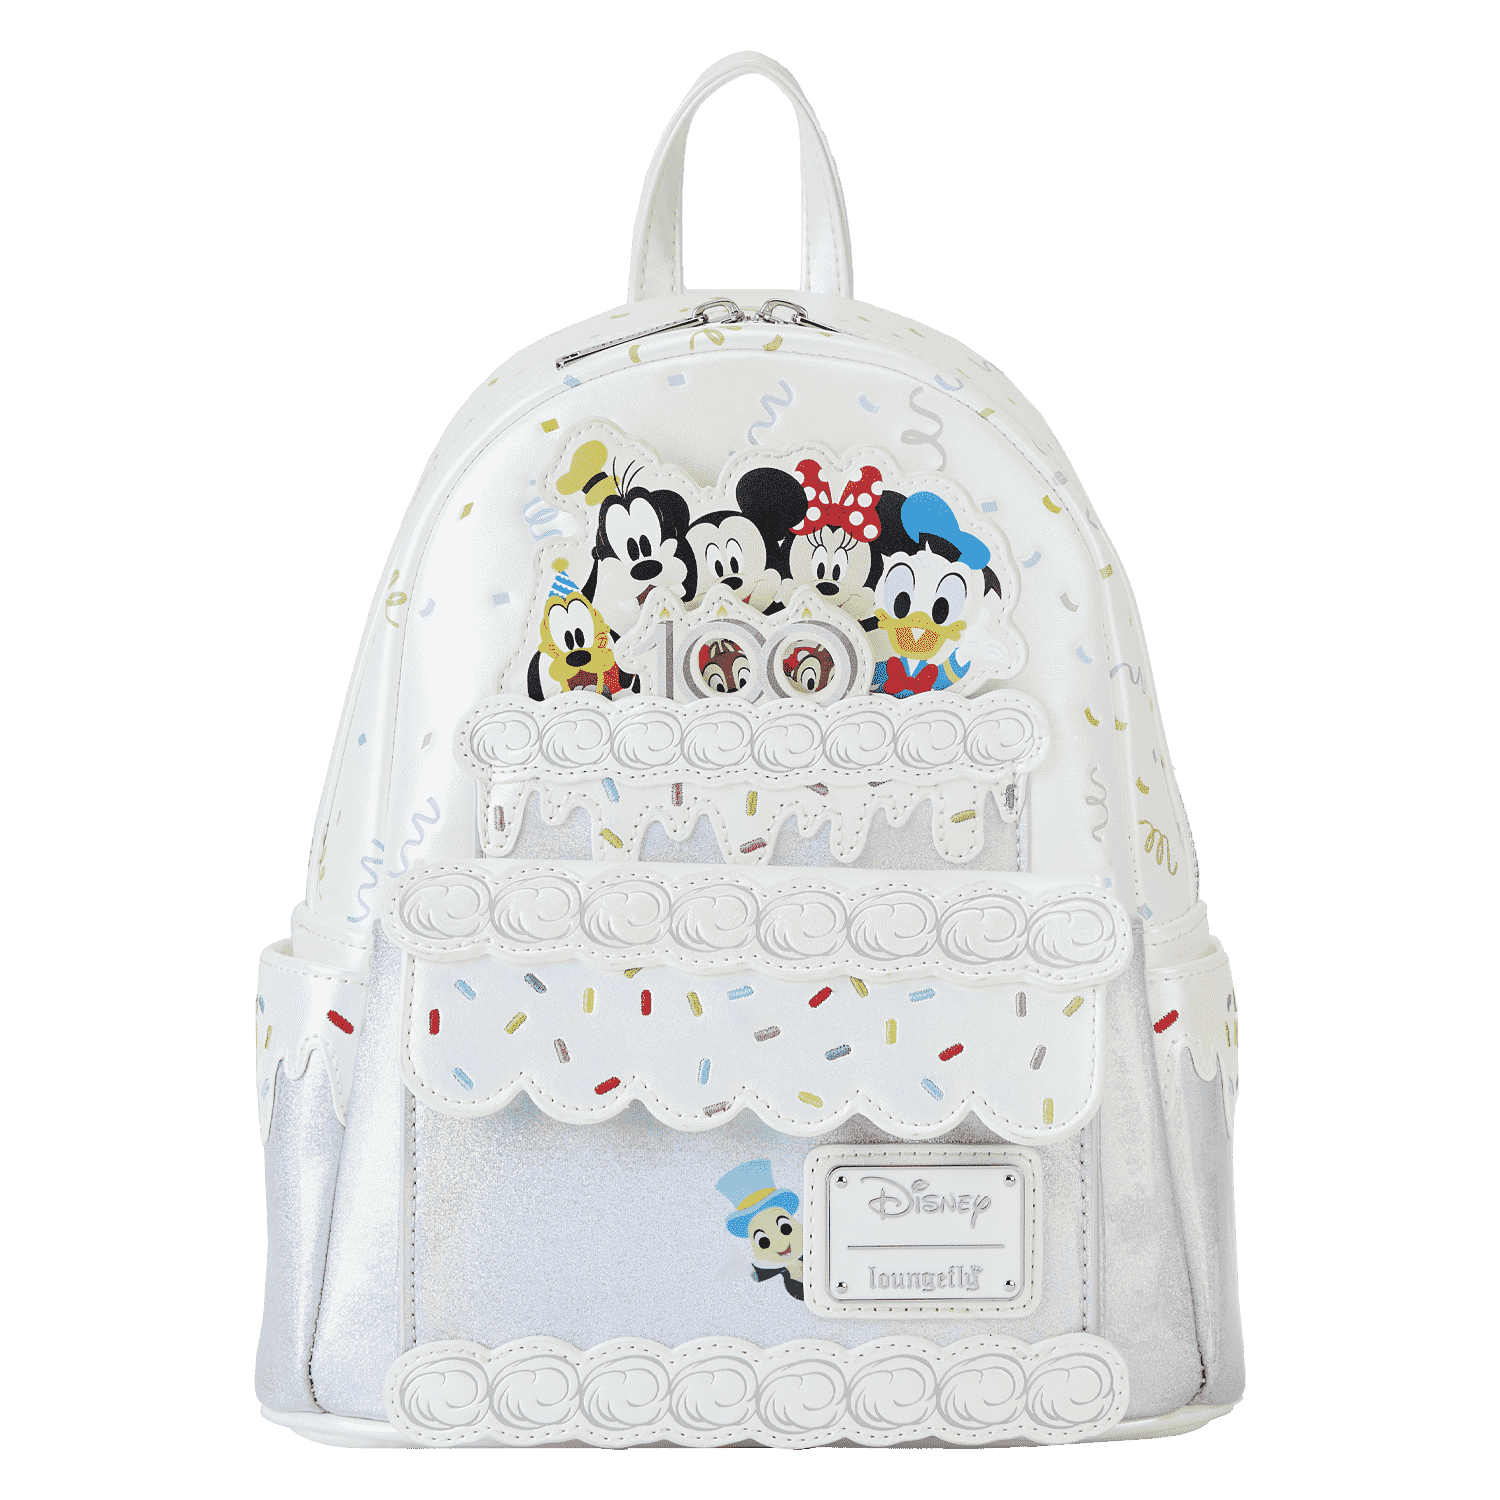 Show Off Your Disney Pin Collection With This NEW Loungefly Backpack! 